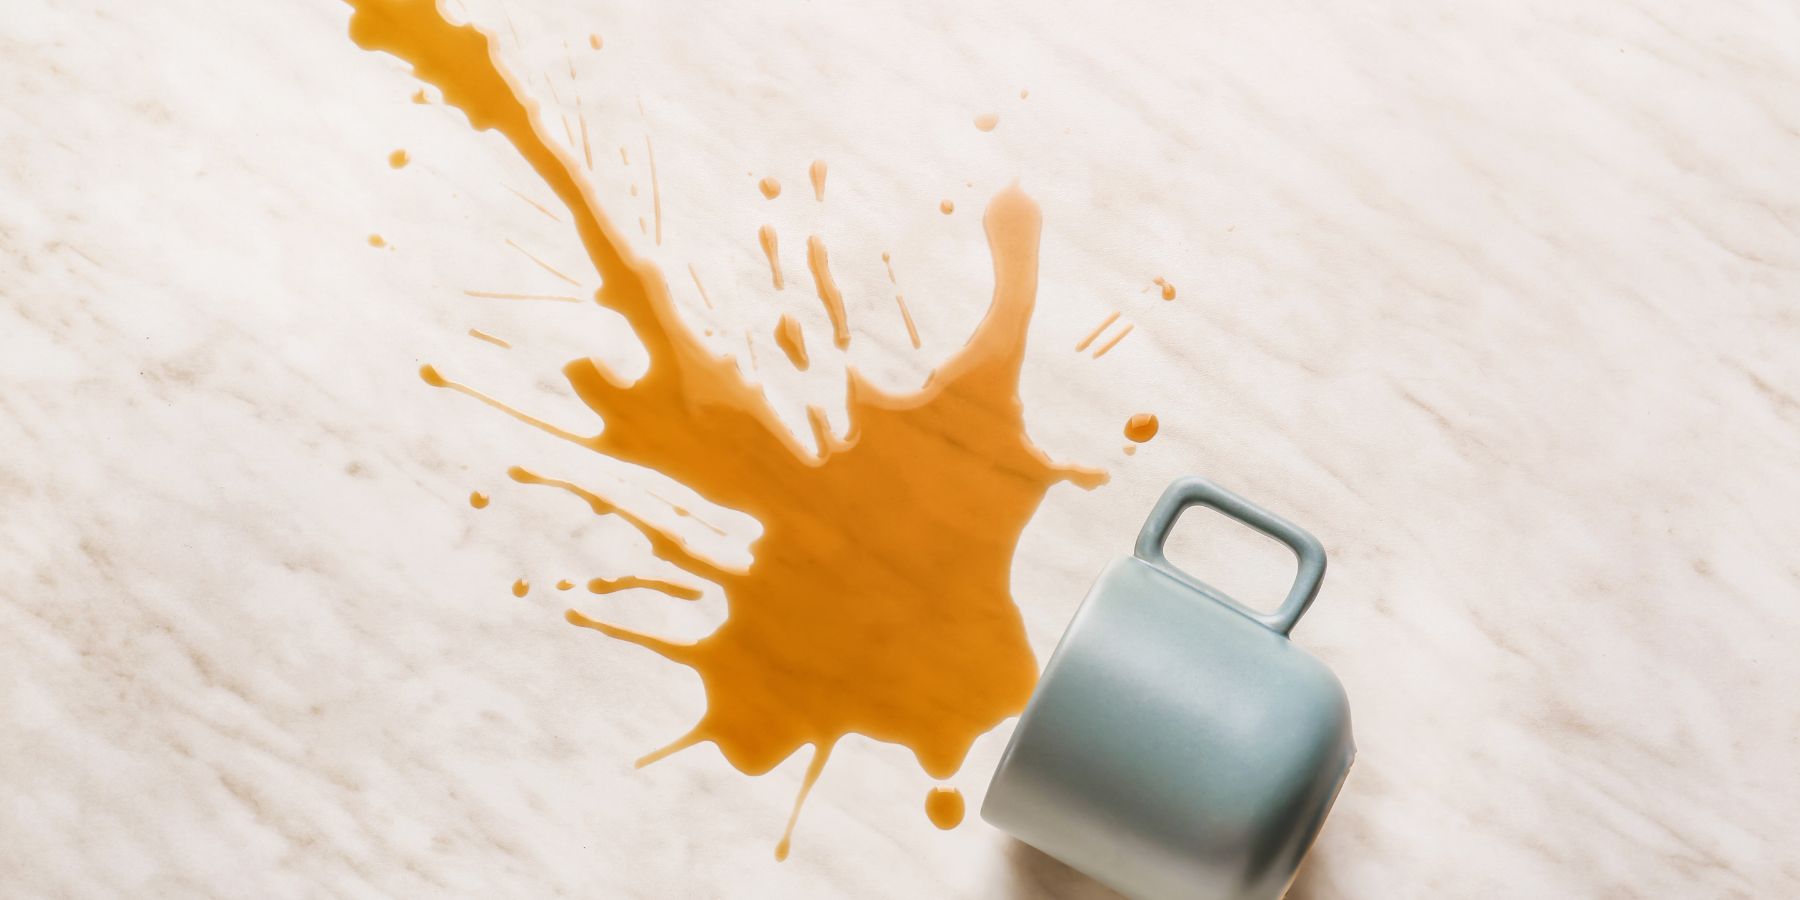 Coffee Stain Removal Tips for the Clumsy Coffee Lover